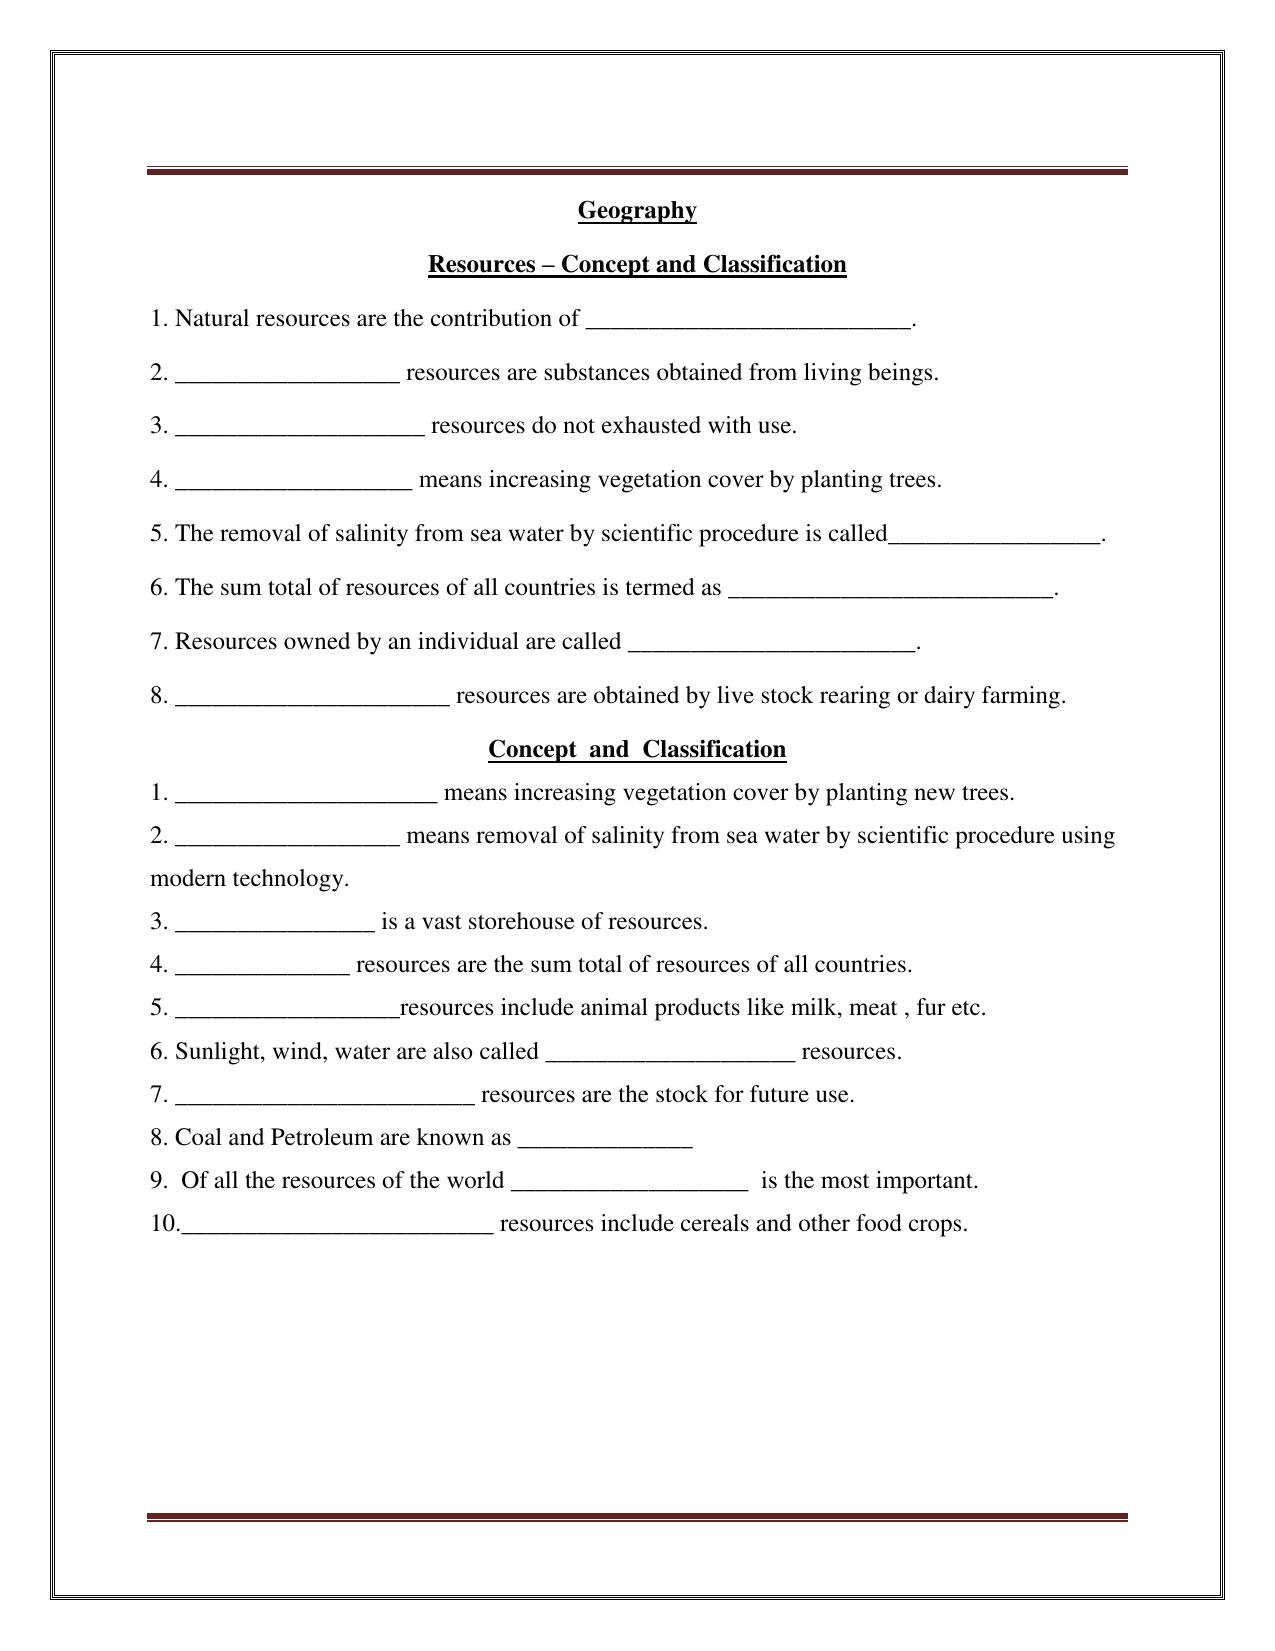 CBSE Worksheets for Class 8 Social Science Resources Concept and Classification Assignment - Page 1